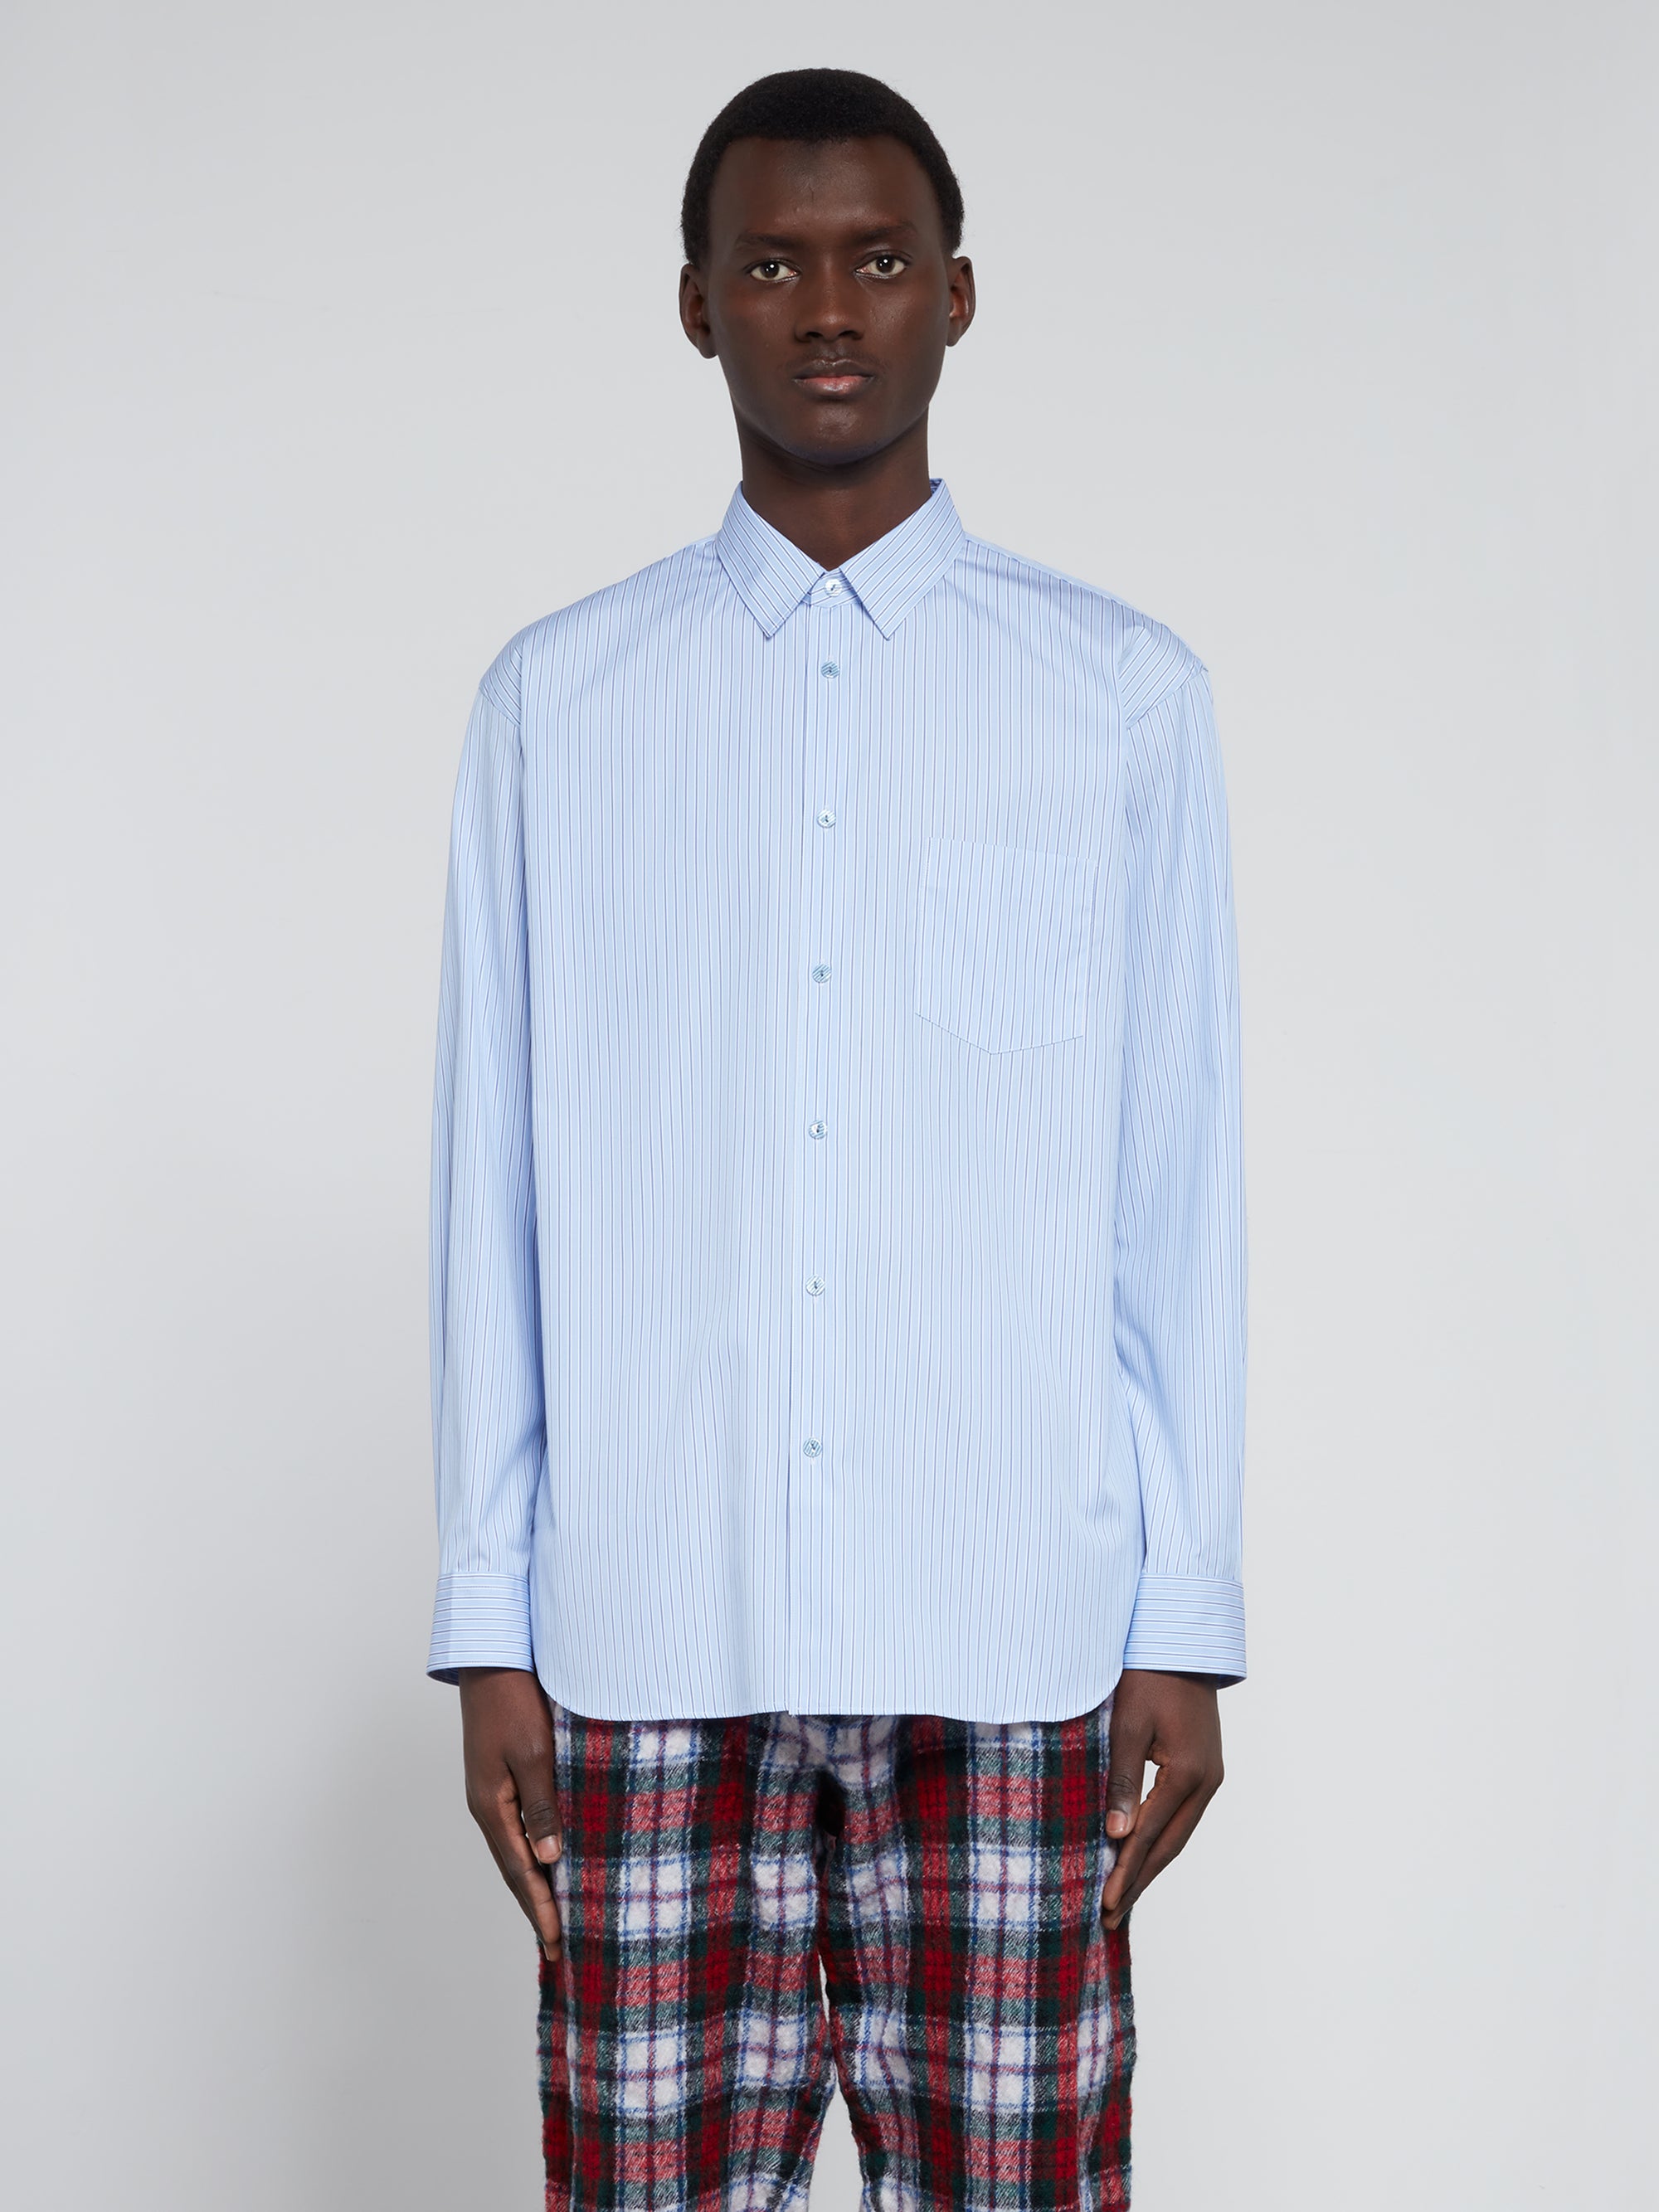 CDG Shirt Forever - Classic Fit Woven Cotton Shirt - (Blue Stripe) view 1